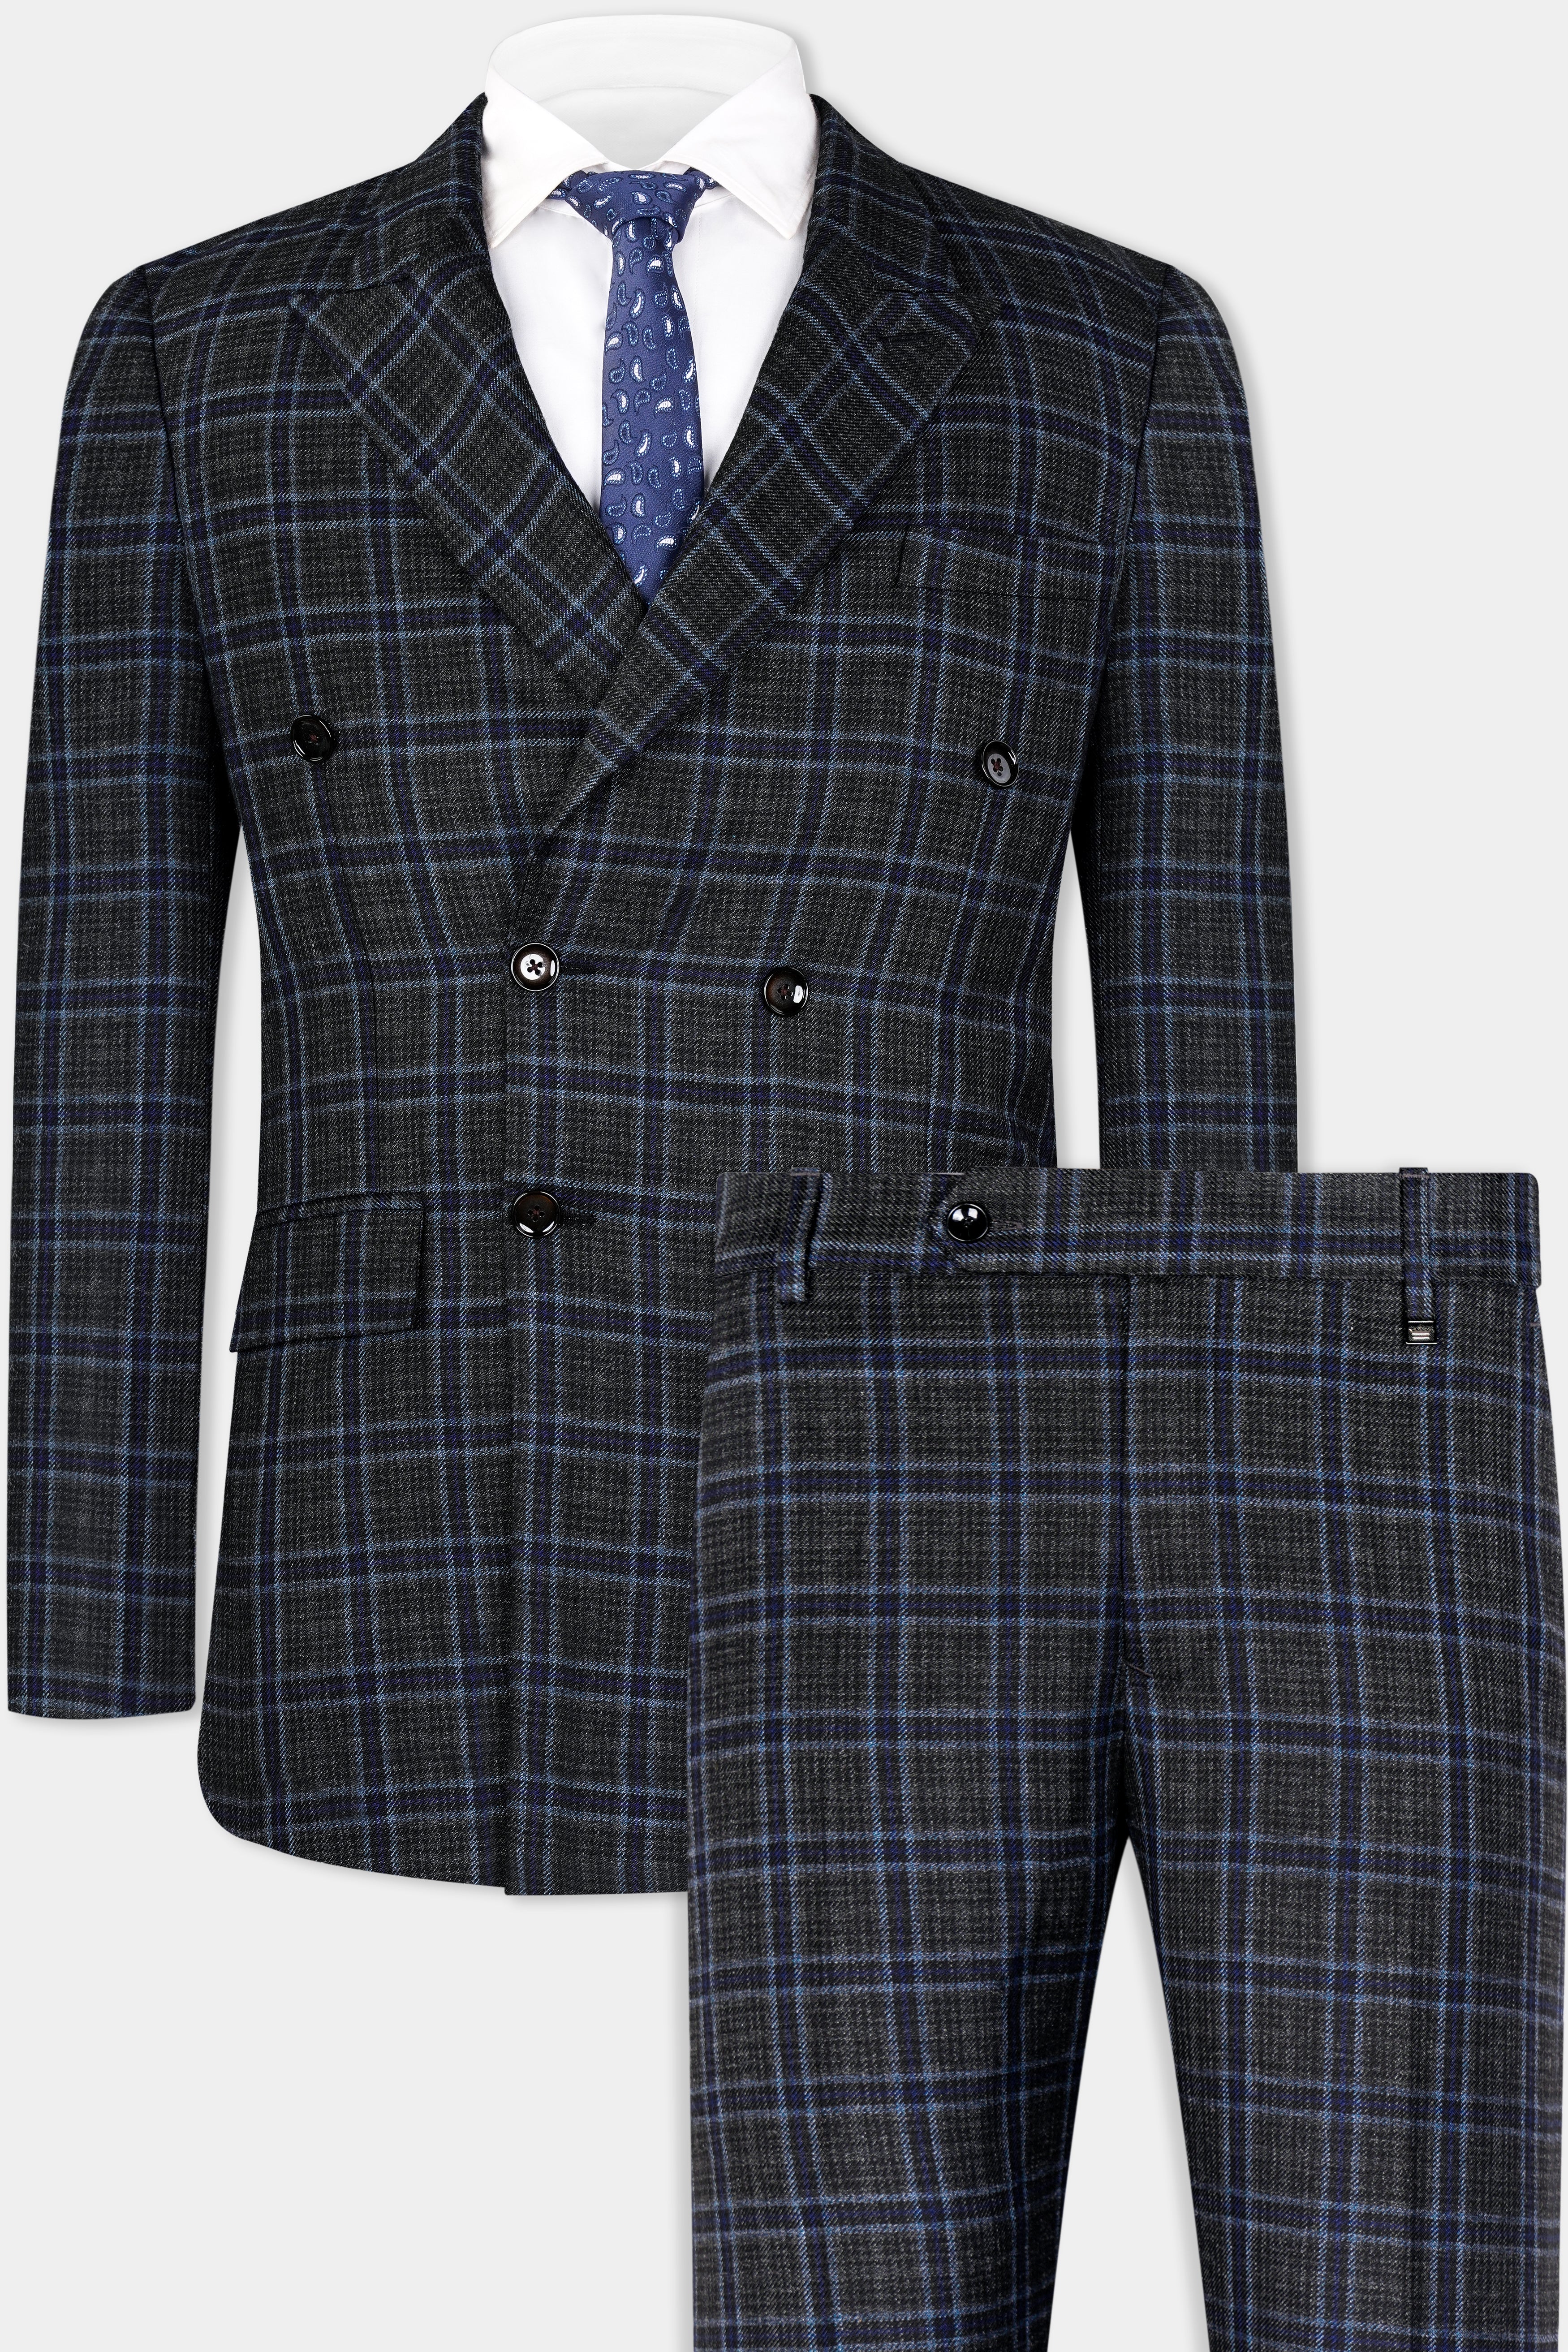 Bleached Black and Marine Blue Plaid Double Breasted Tweed Suit ST2907-DB-36,ST2907-DB-38,ST2907-DB-40,ST2907-DB-42,ST2907-DB-44,ST2907-DB-46,ST2907-DB-48,ST2907-DB-50,ST2907-DB-52,ST2907-DB-54,ST2907-DB-56,ST2907-DB-58,ST2907-DB-60